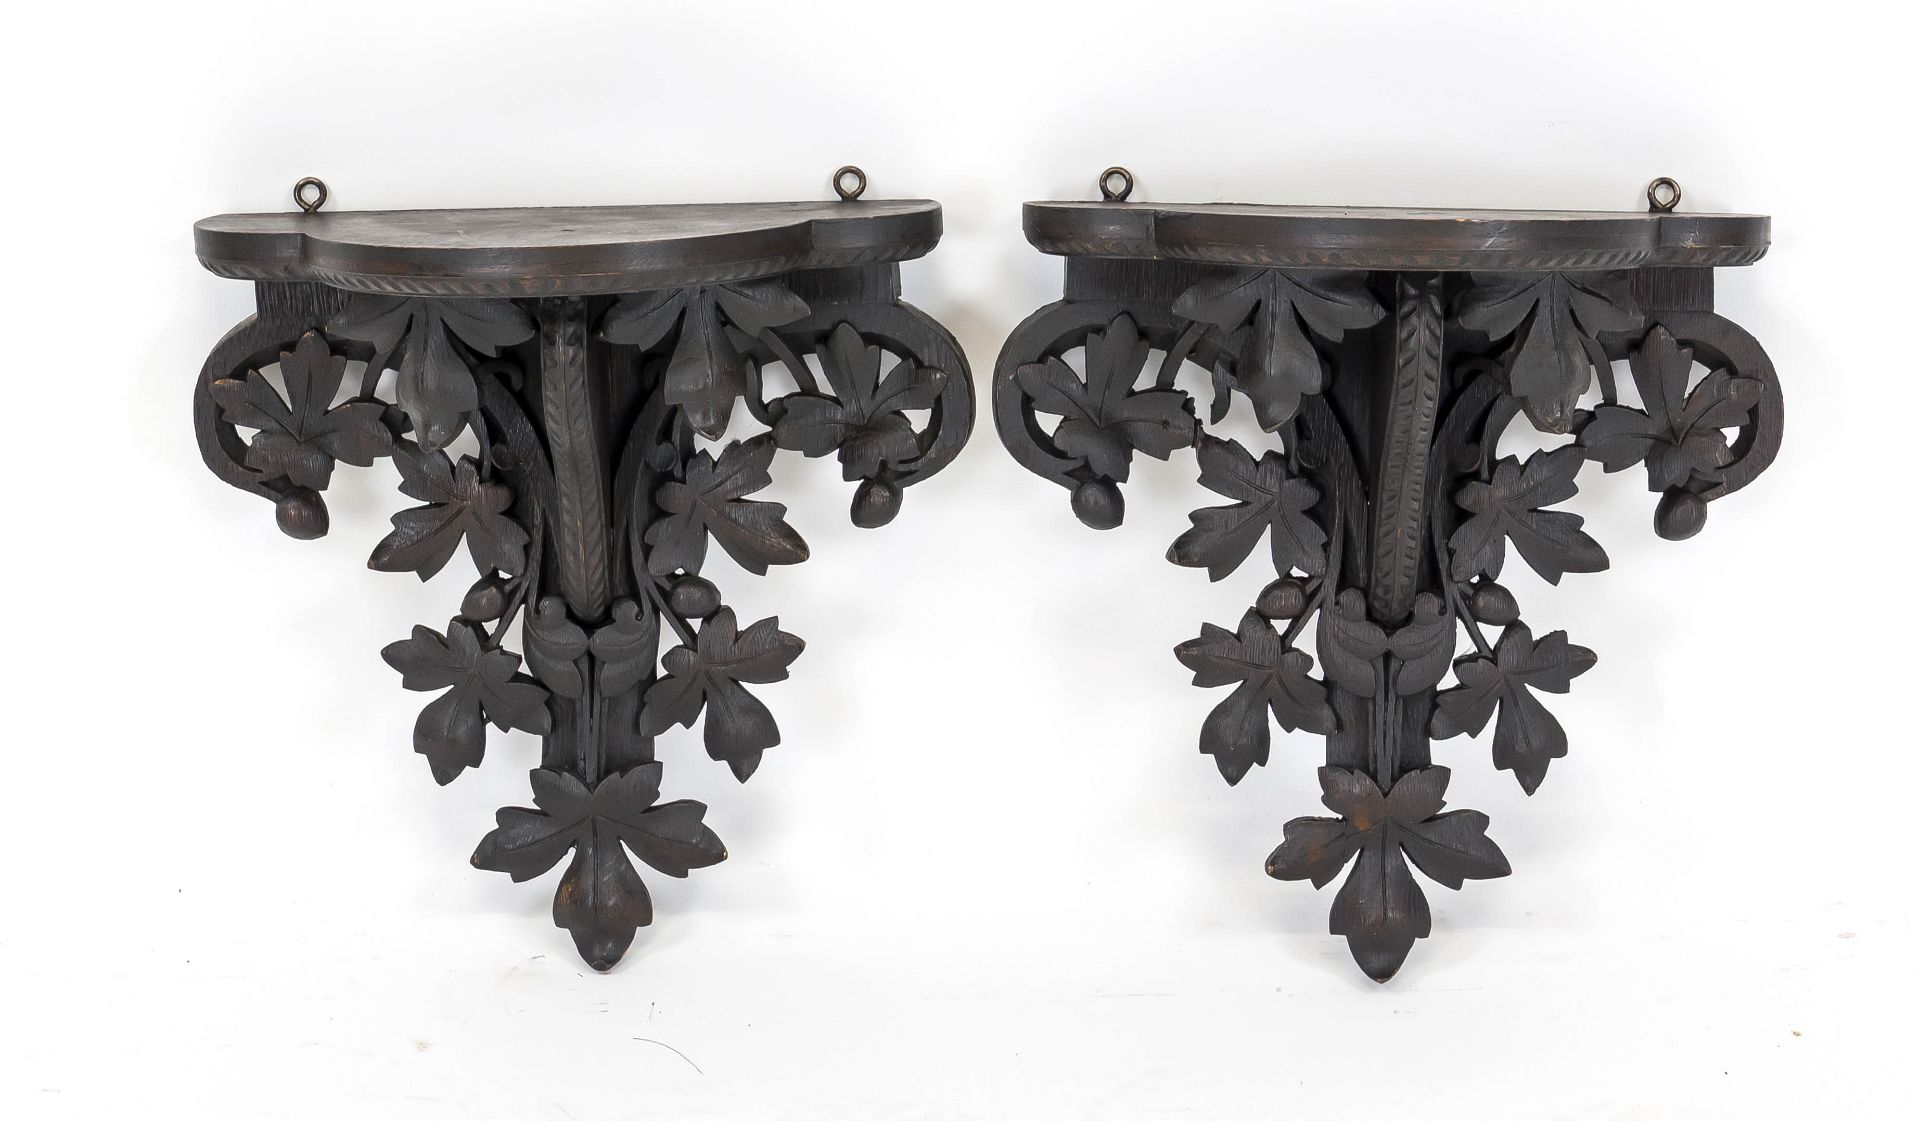 Pair of wall brackets, 20th century, solid, dark-stained wood, curved base, openwork carved with